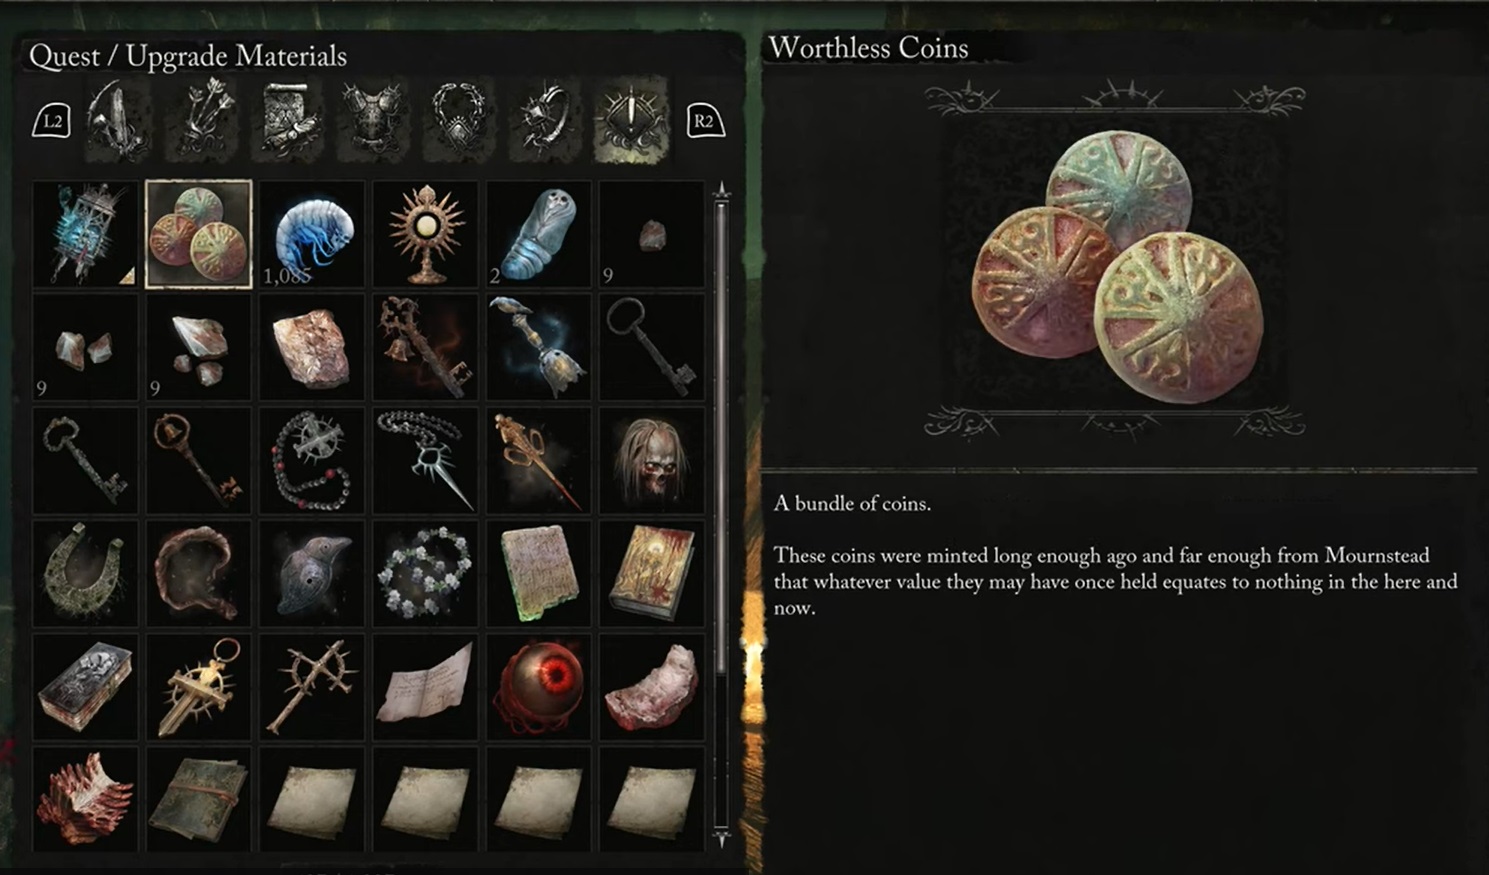 Worthless coins are the quest items found during Byron questline.